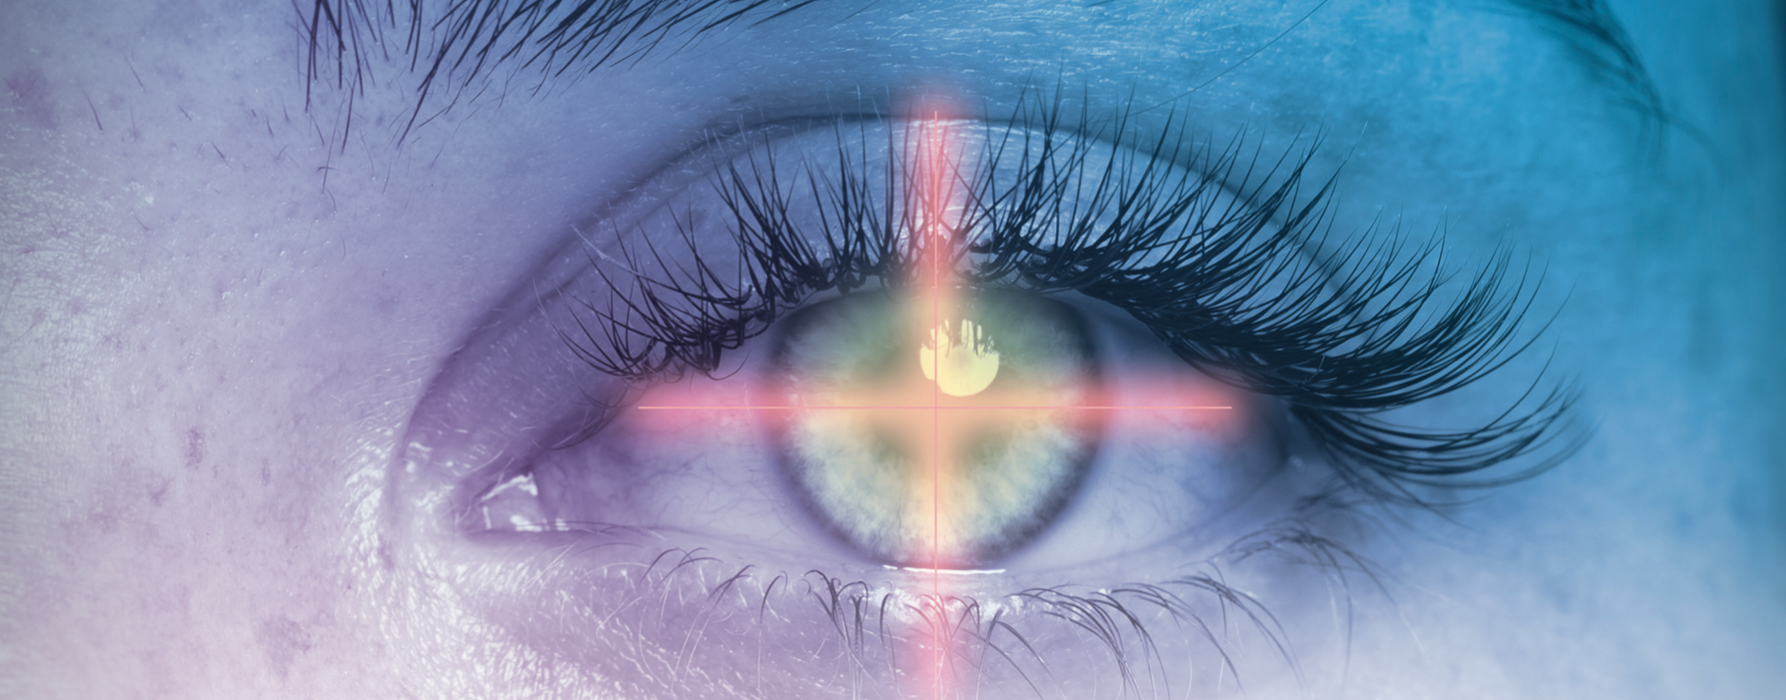 Collagen crosslinking provides corneal stability in young patients